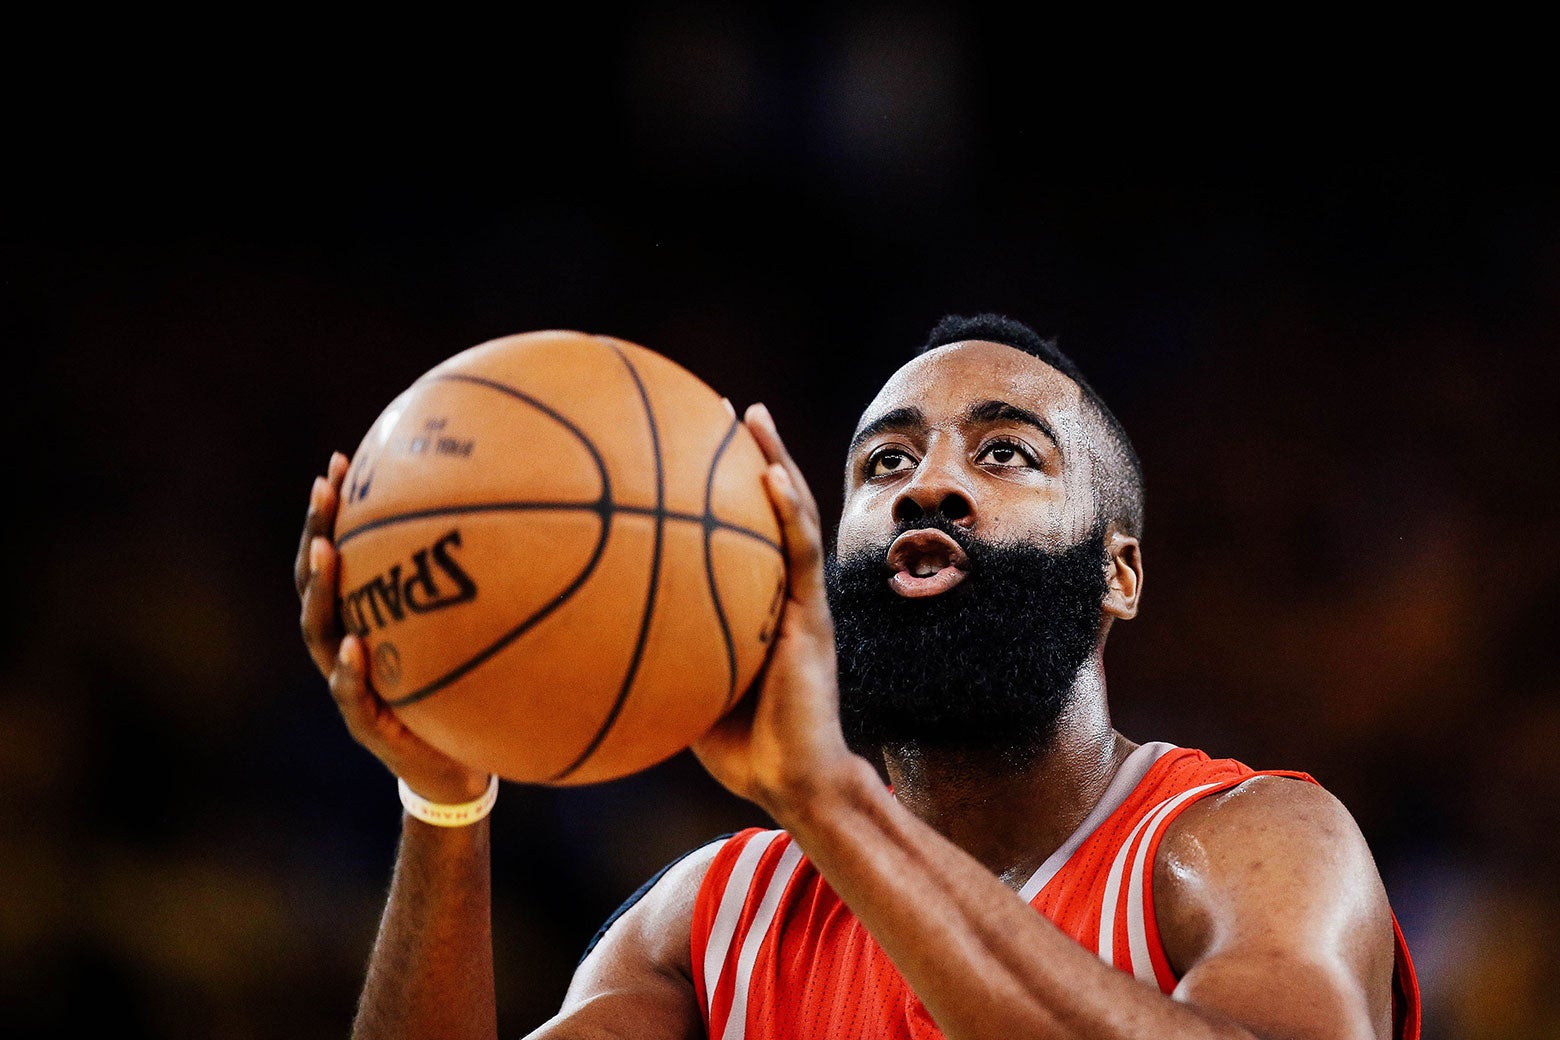 James Harden of the Houston Rockets shoots a free throw against the Golden State Warriors during Game 1 of the Western Conference Finals of the 2015 NBA Playoffs at Oracle Arena on May 19, 2015, in Oakland, California.